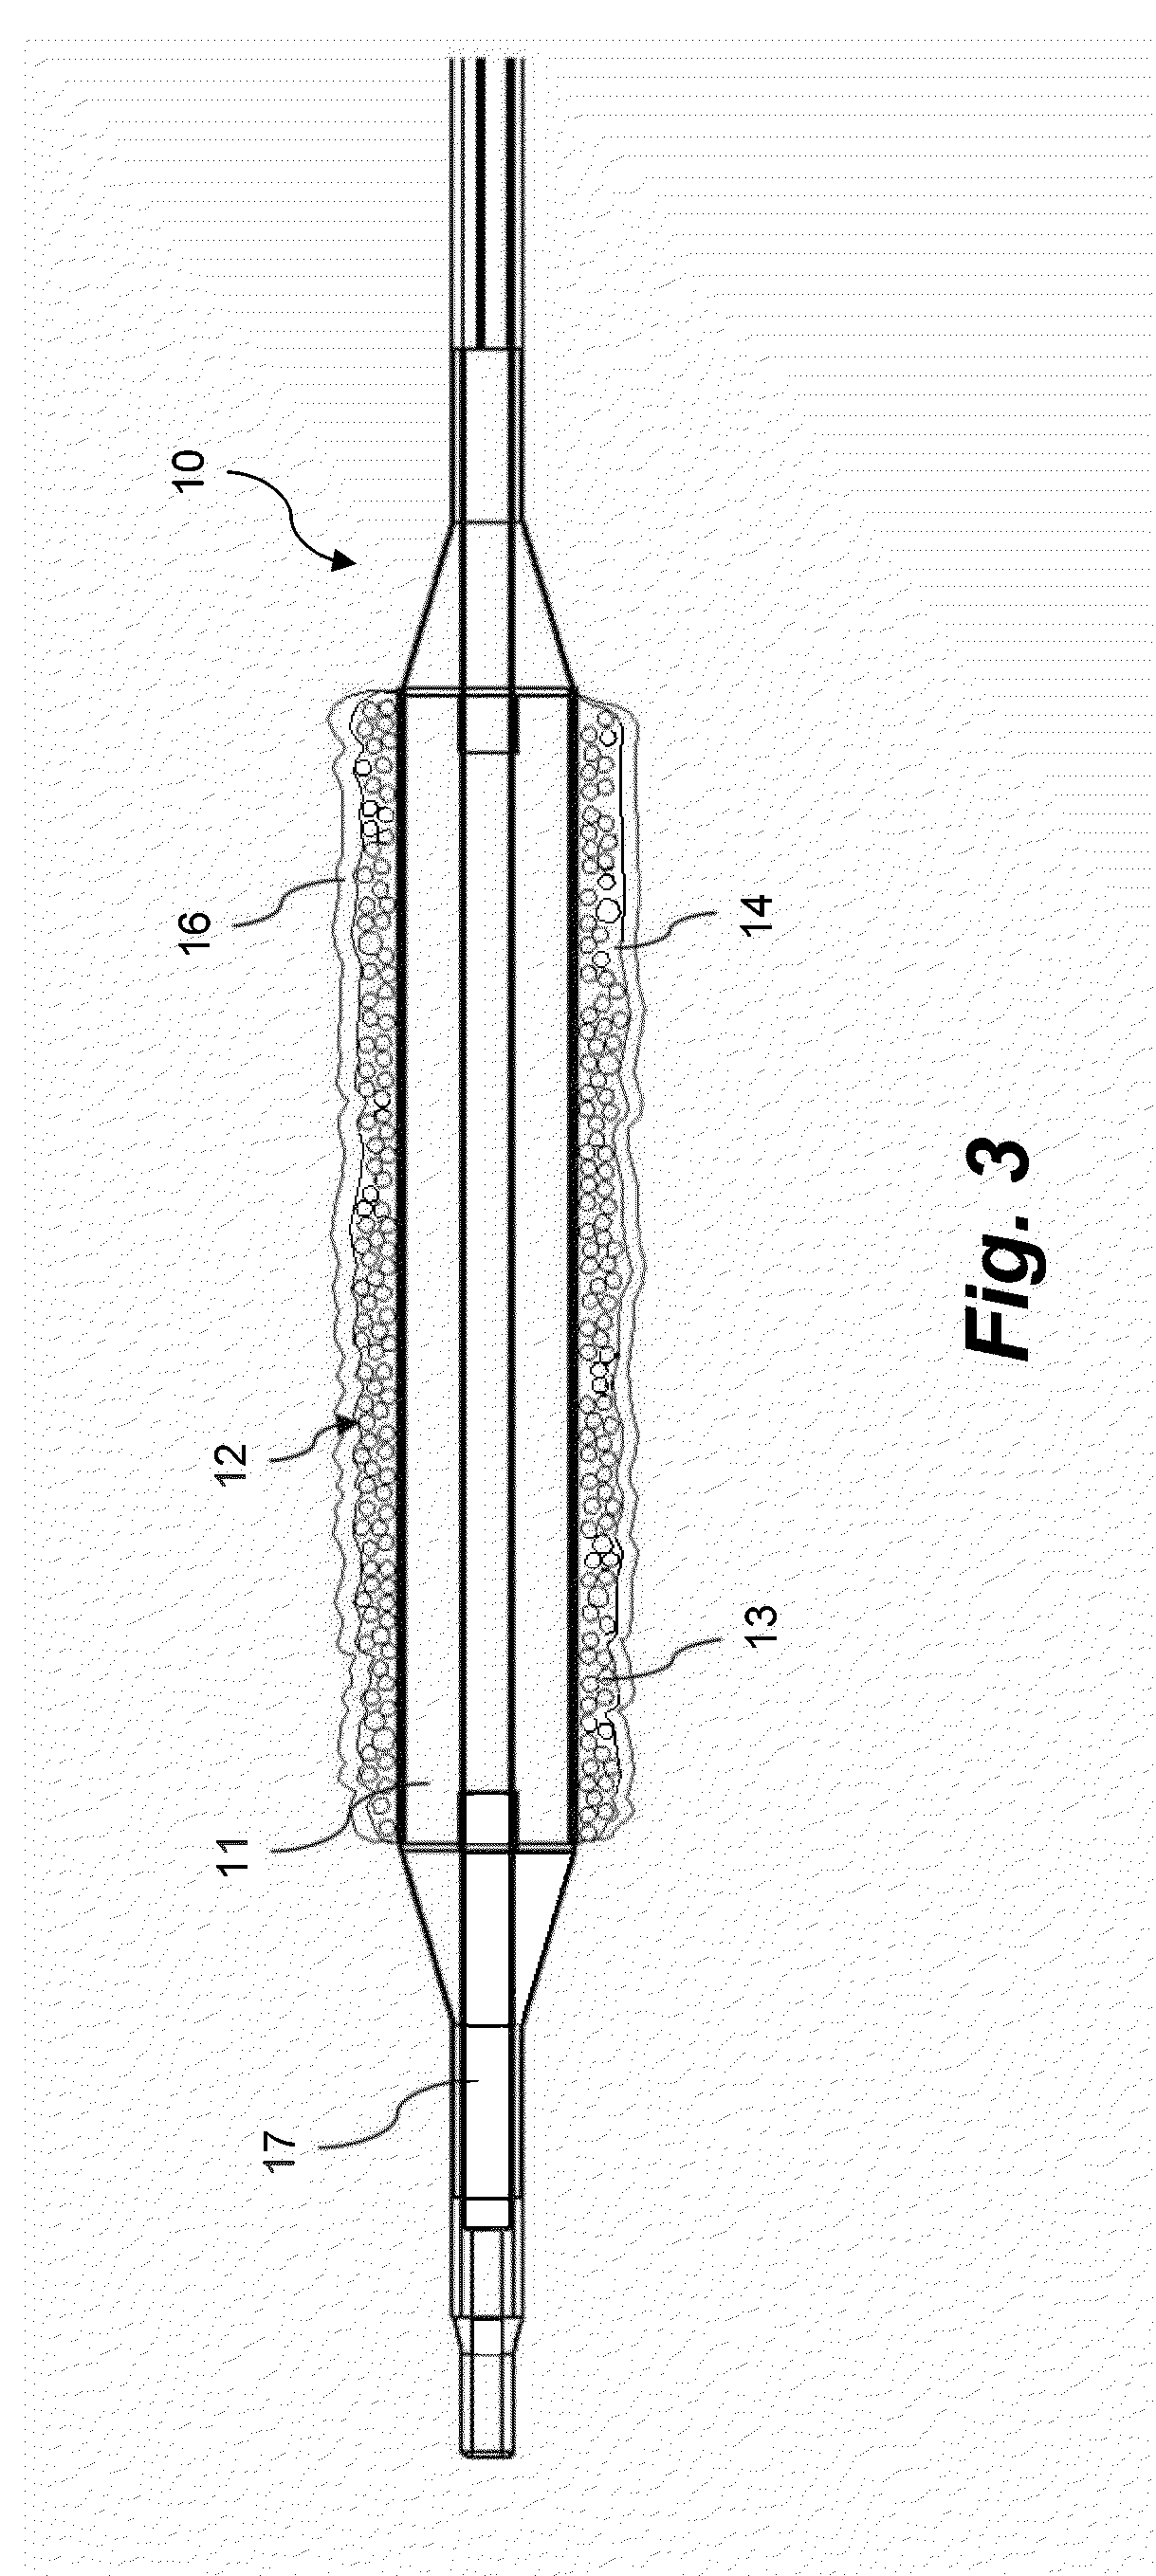 Coating for intraluminal expandable catheter providing contact transfer of drug micro-reservoirs